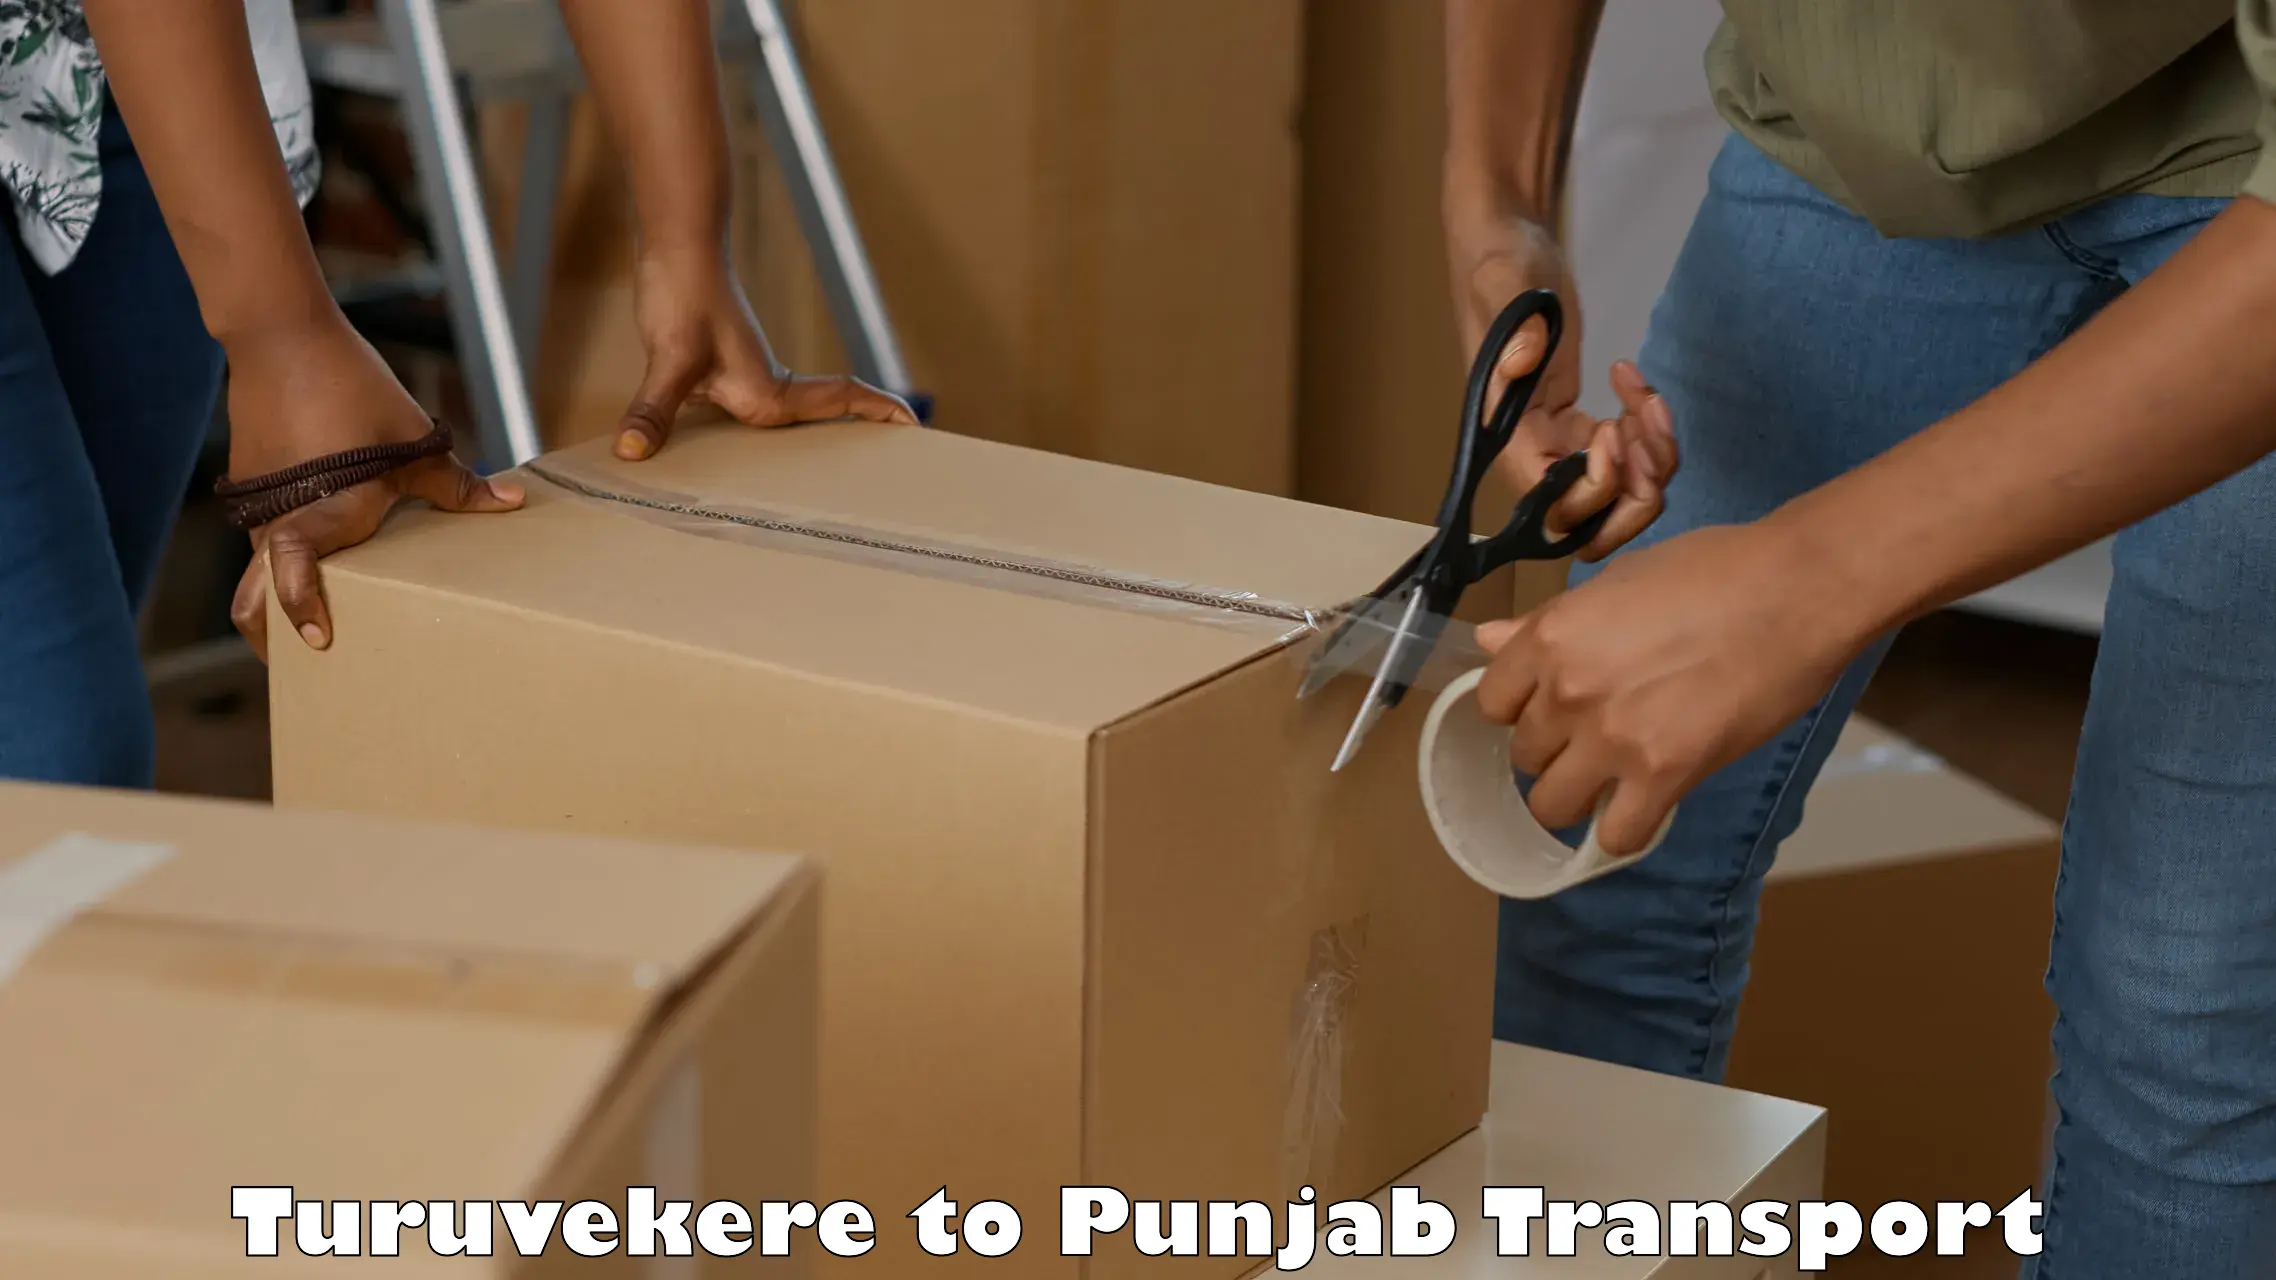 Transport in sharing Turuvekere to Begowal